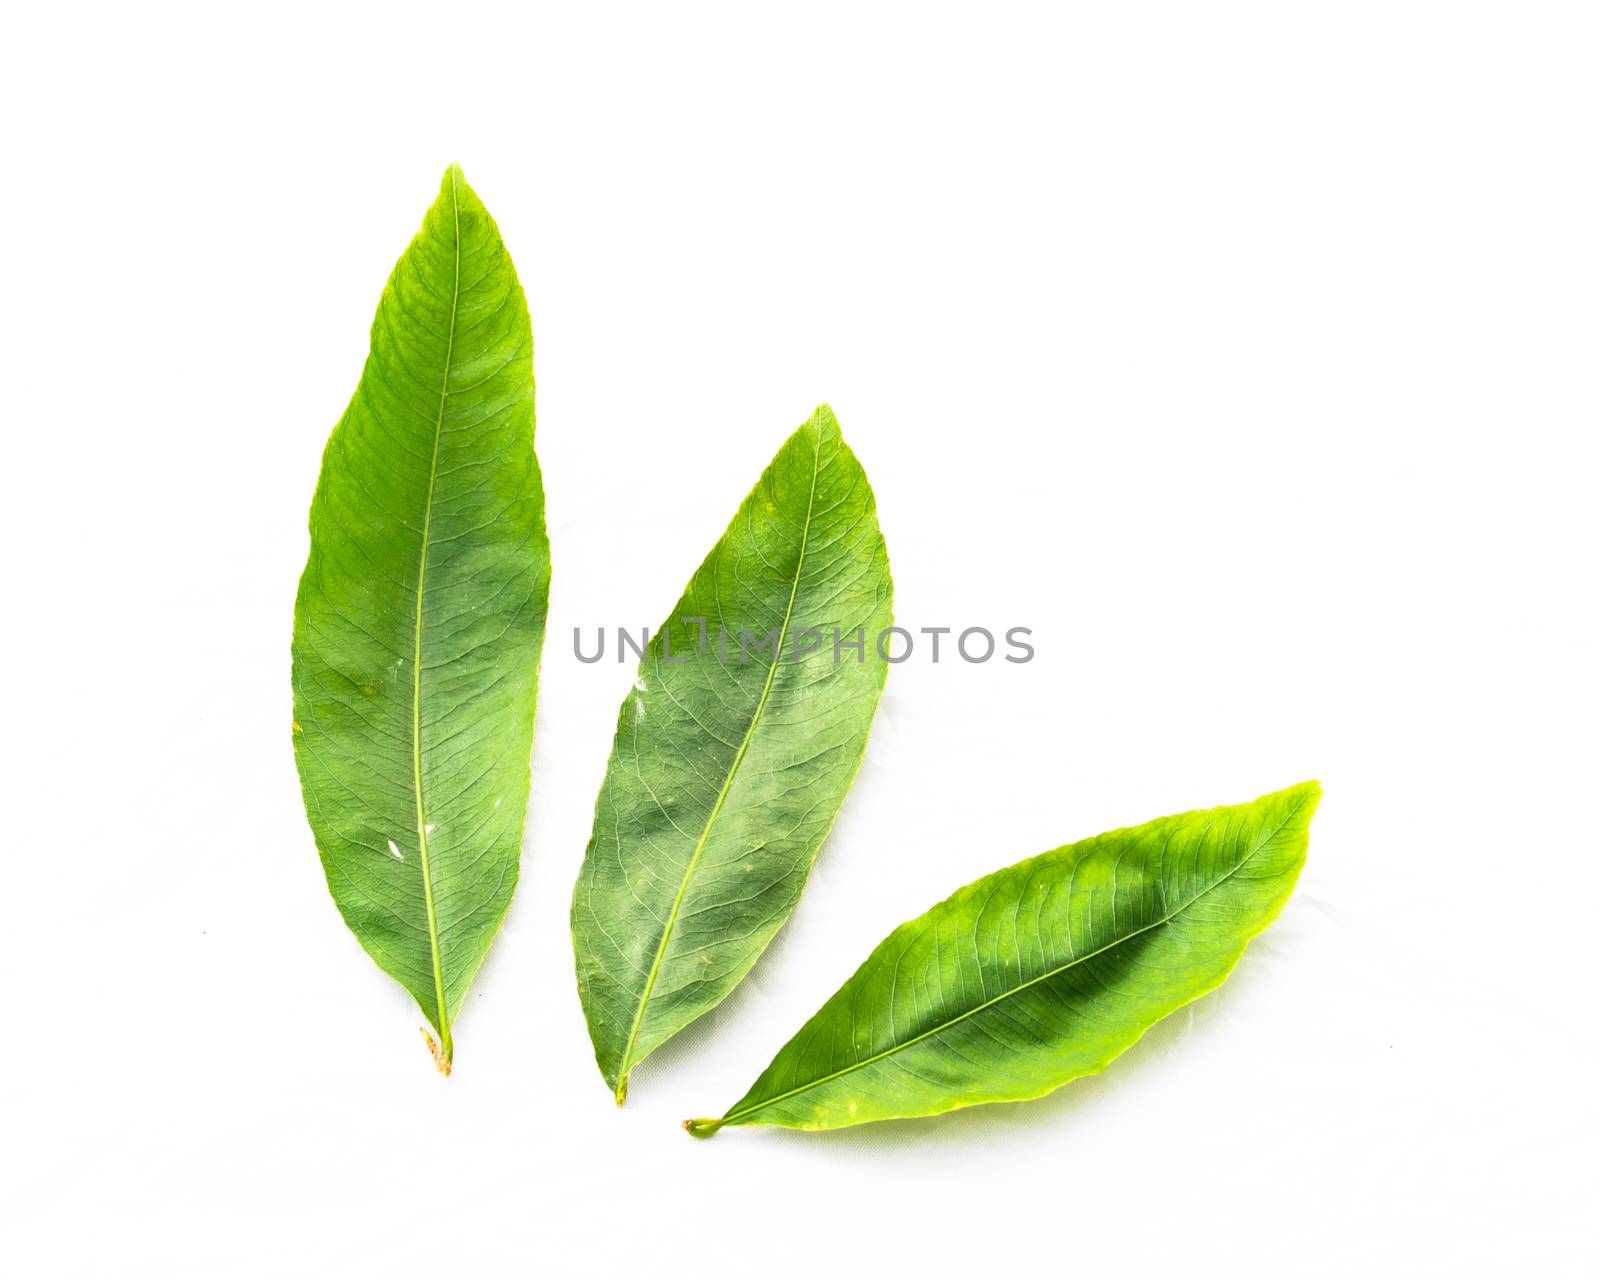 Top view studio shot two Ochna integerrima leaves isolated on white background. Green leaf from yellow Mai flower, a plant species in family Ochnaceae. Popular in southern Vietnam during Tet festival